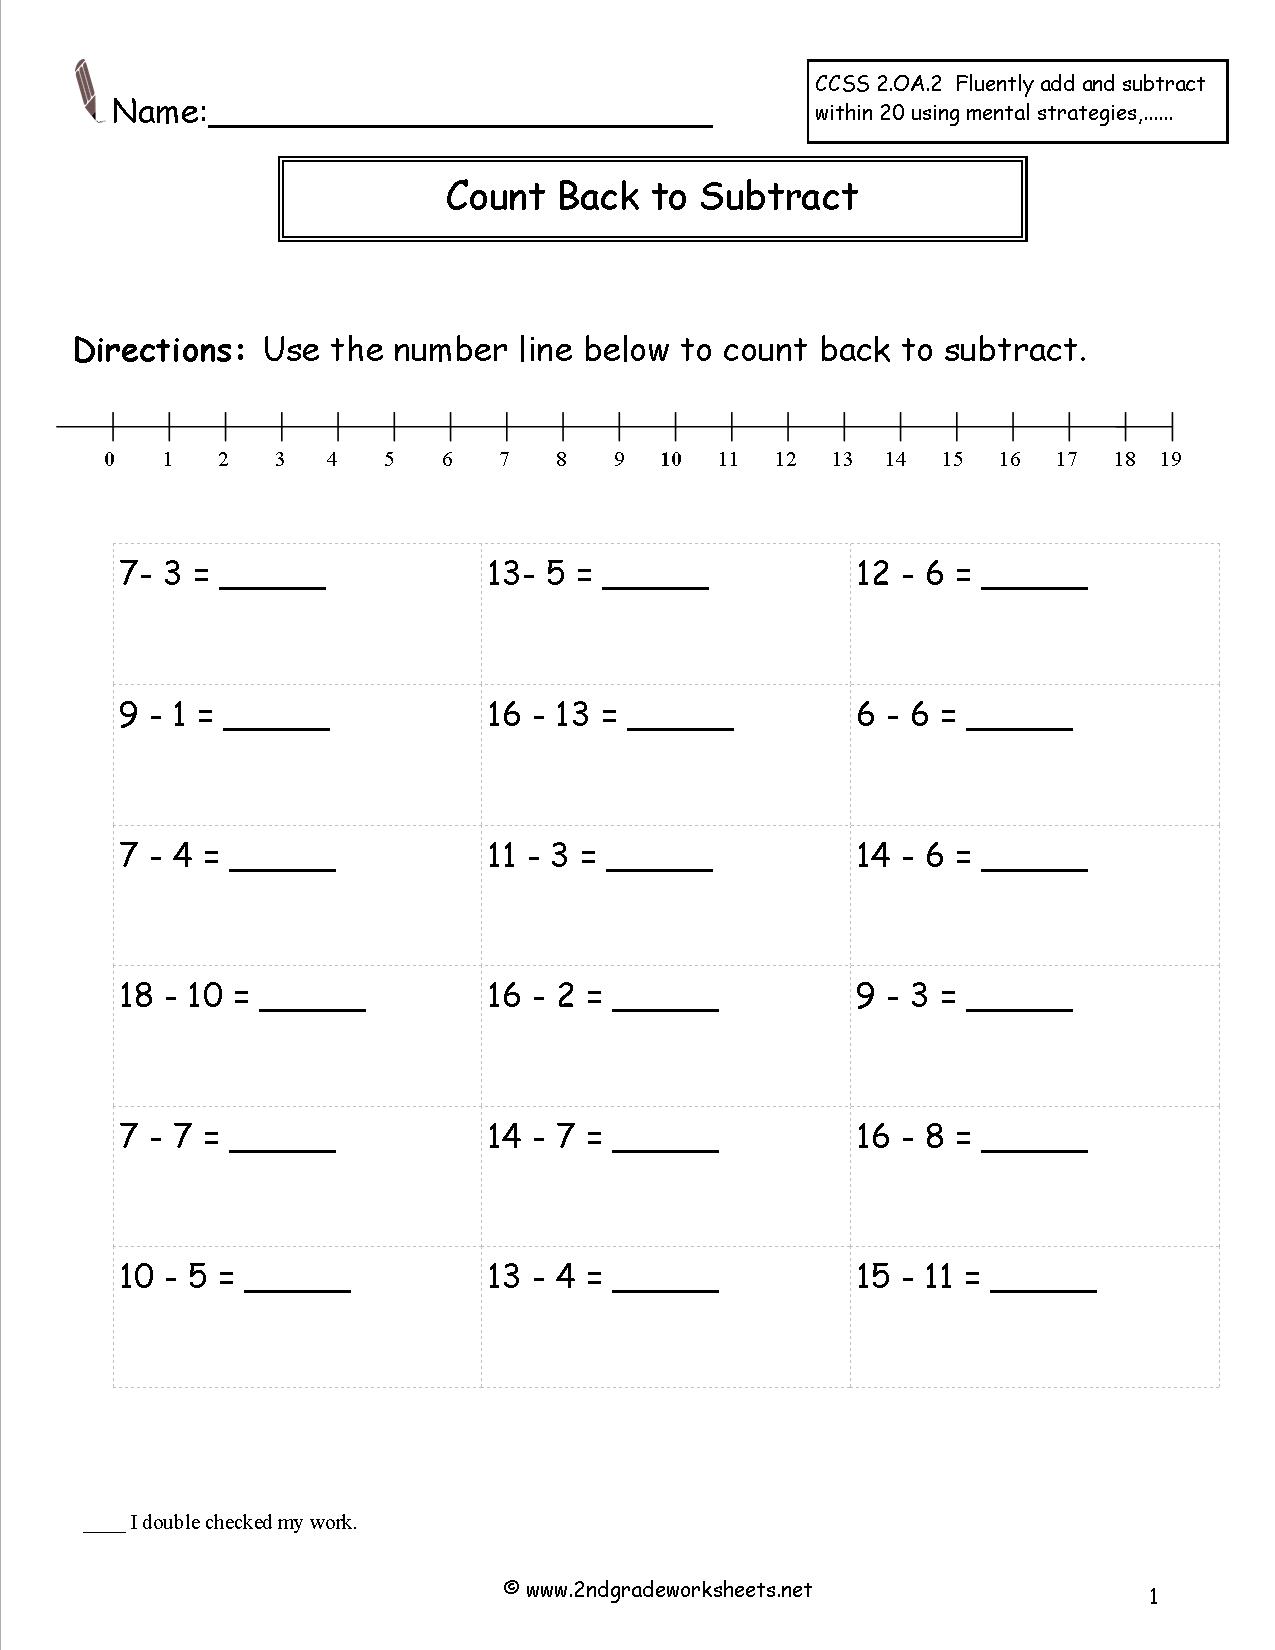 Subtraction Worksheets within 20 Image